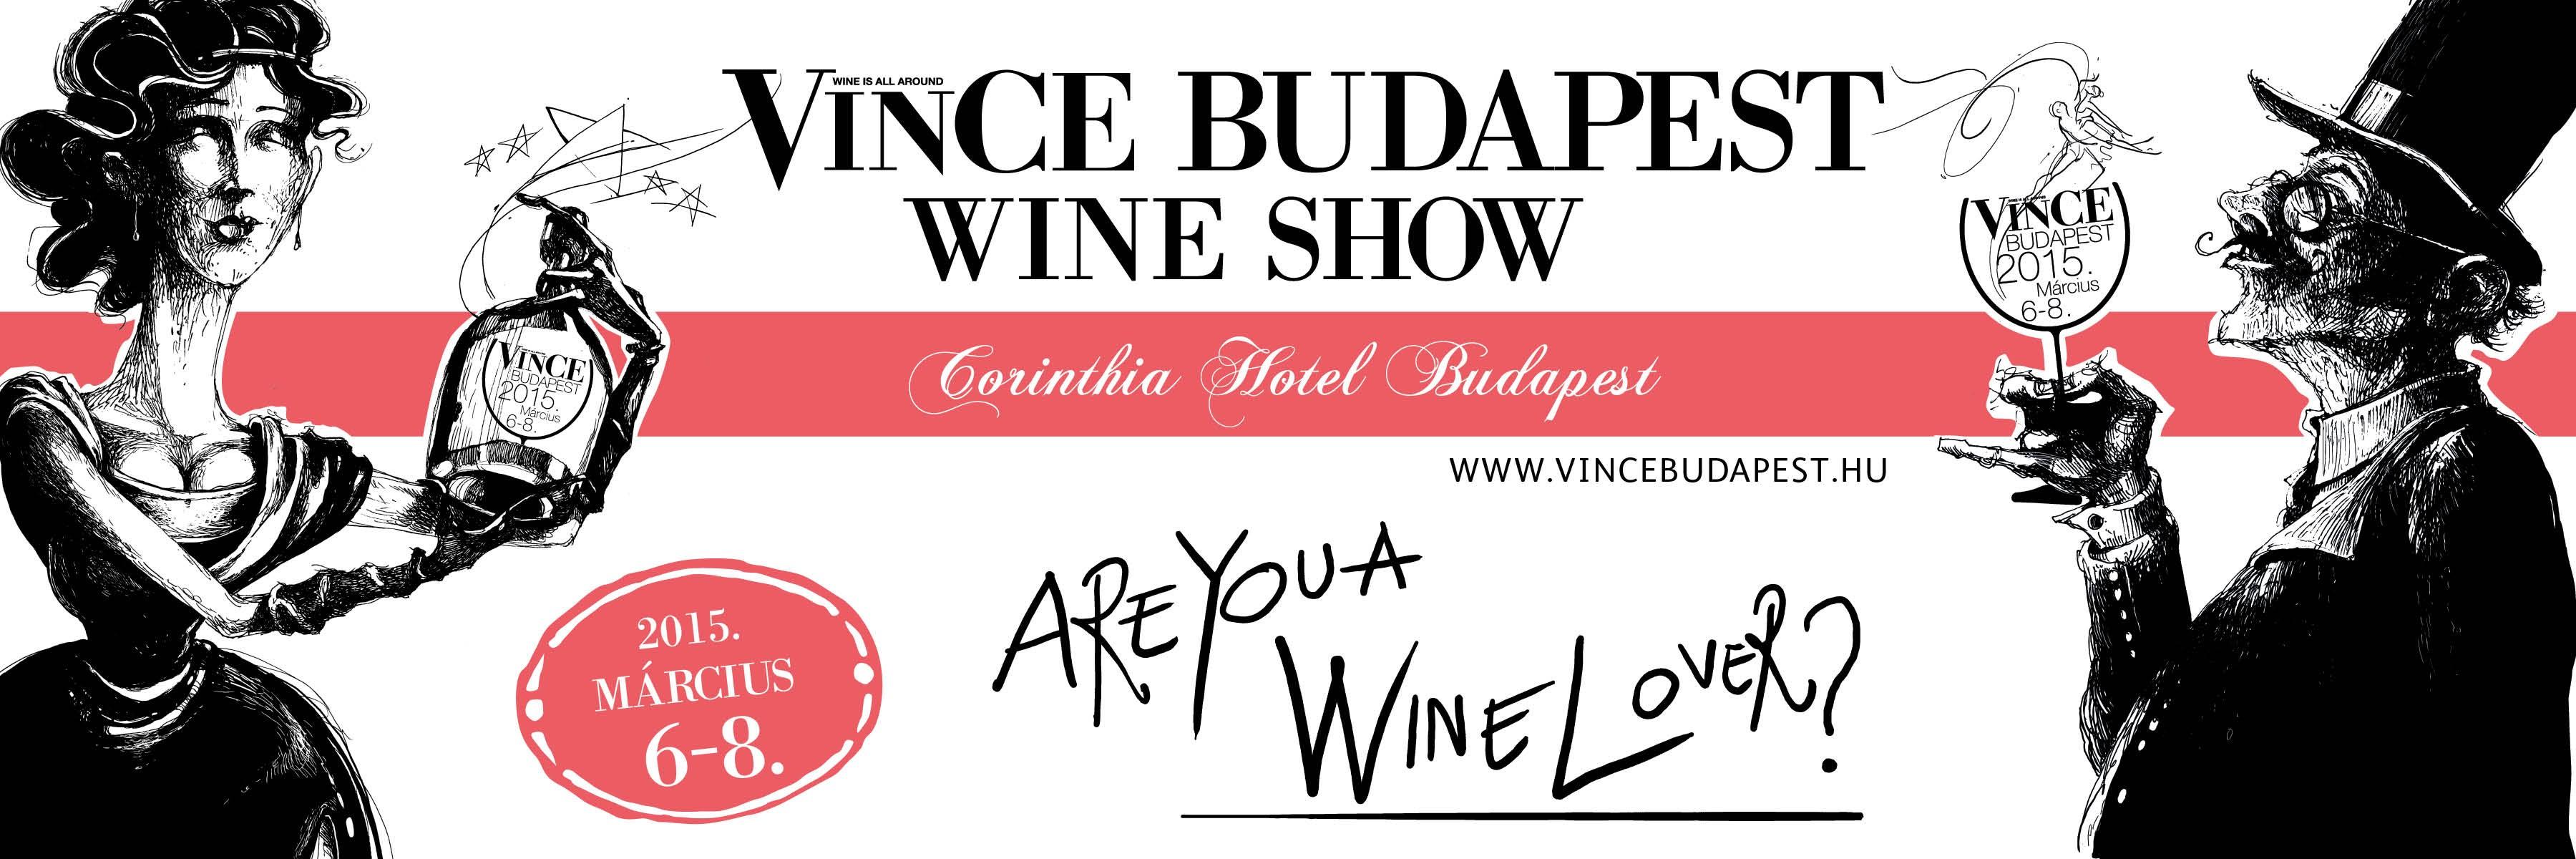 VinCE Budapest Wine Show, Corinthia Hotel Budapest, 6 – 8 March